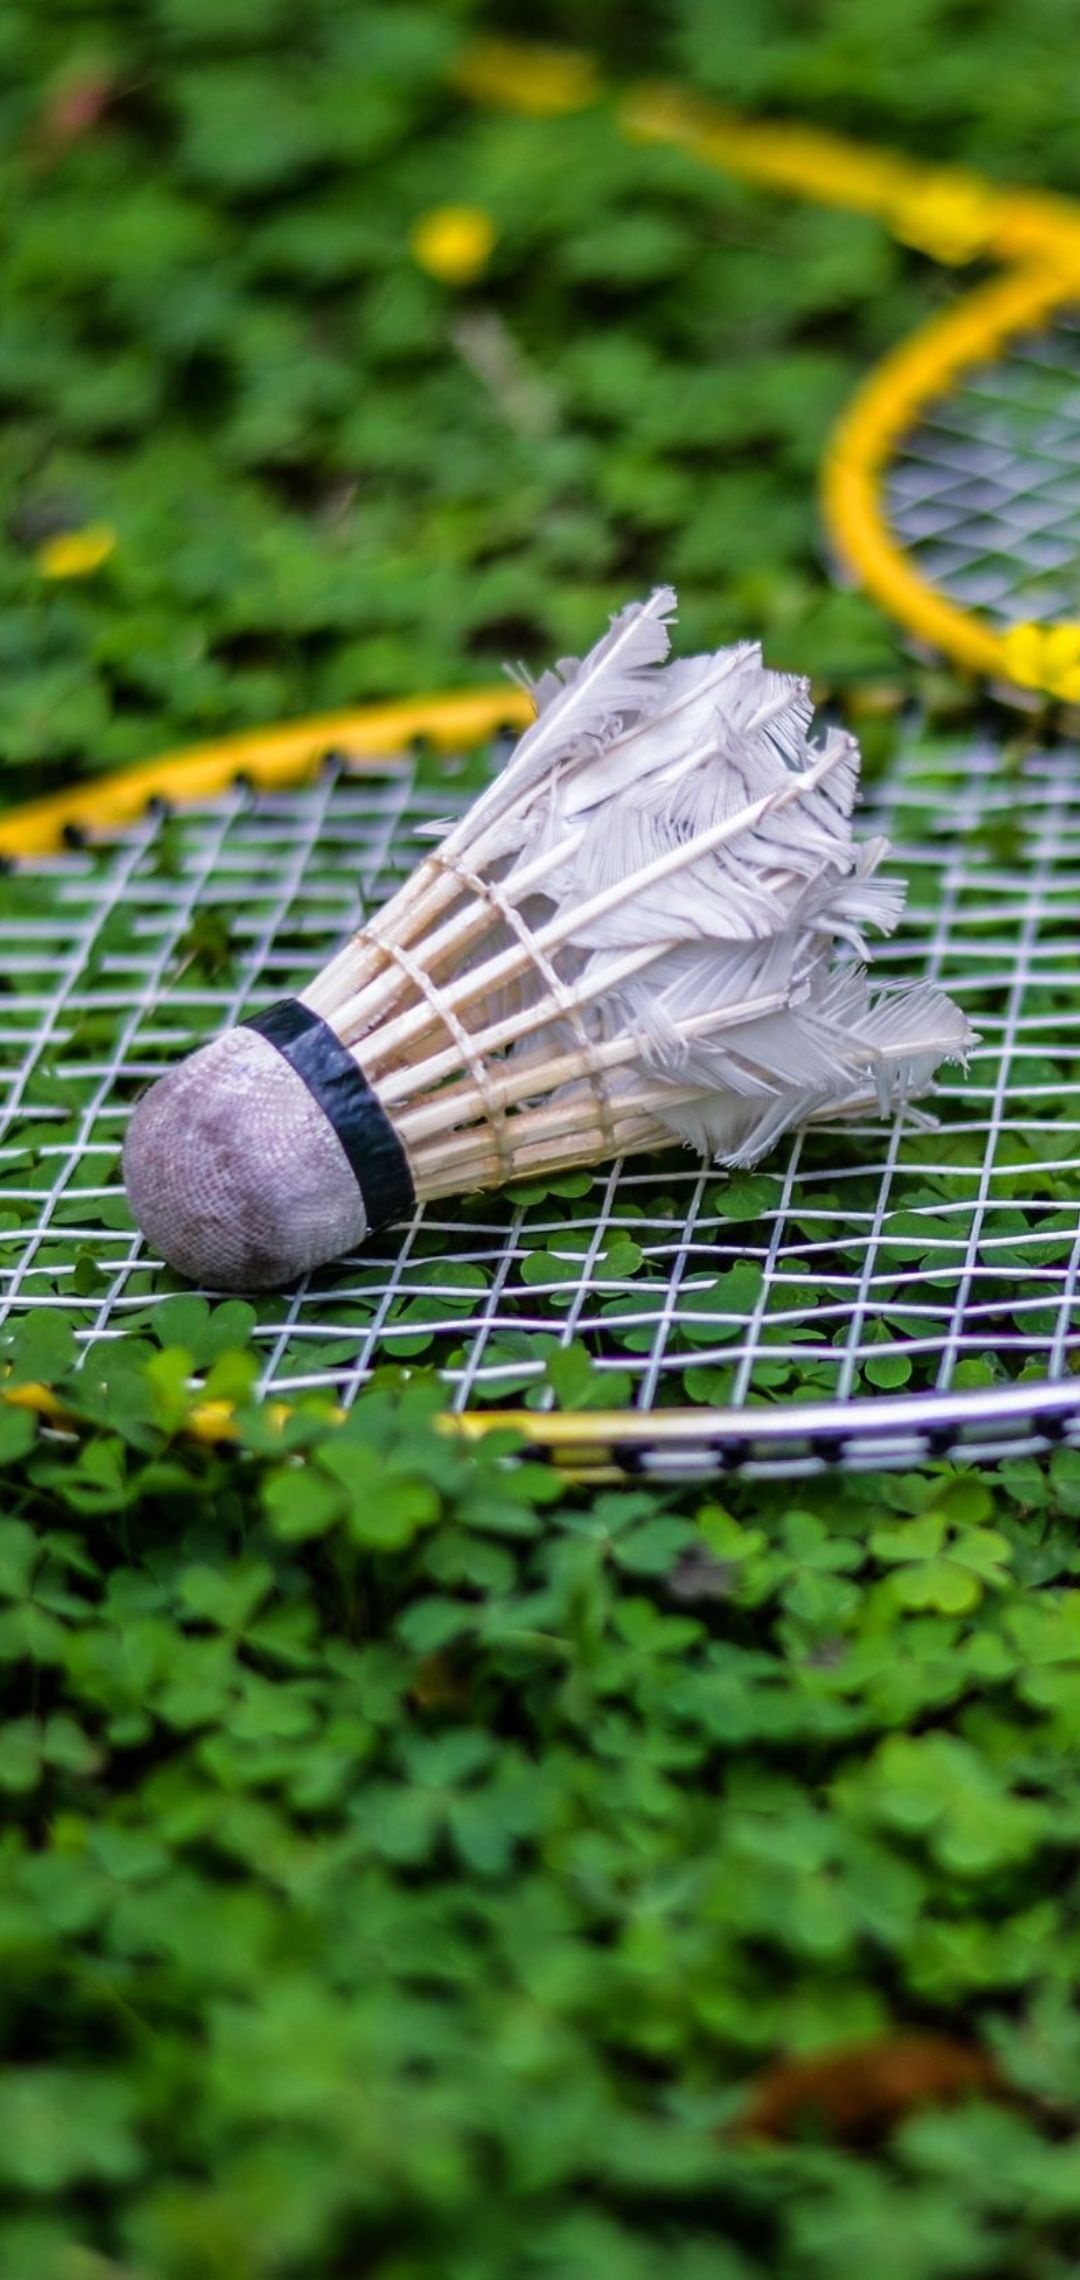 Badminton action shots, HD wallpapers, Dynamic movement, Energetic players, 1080x2280 HD Handy